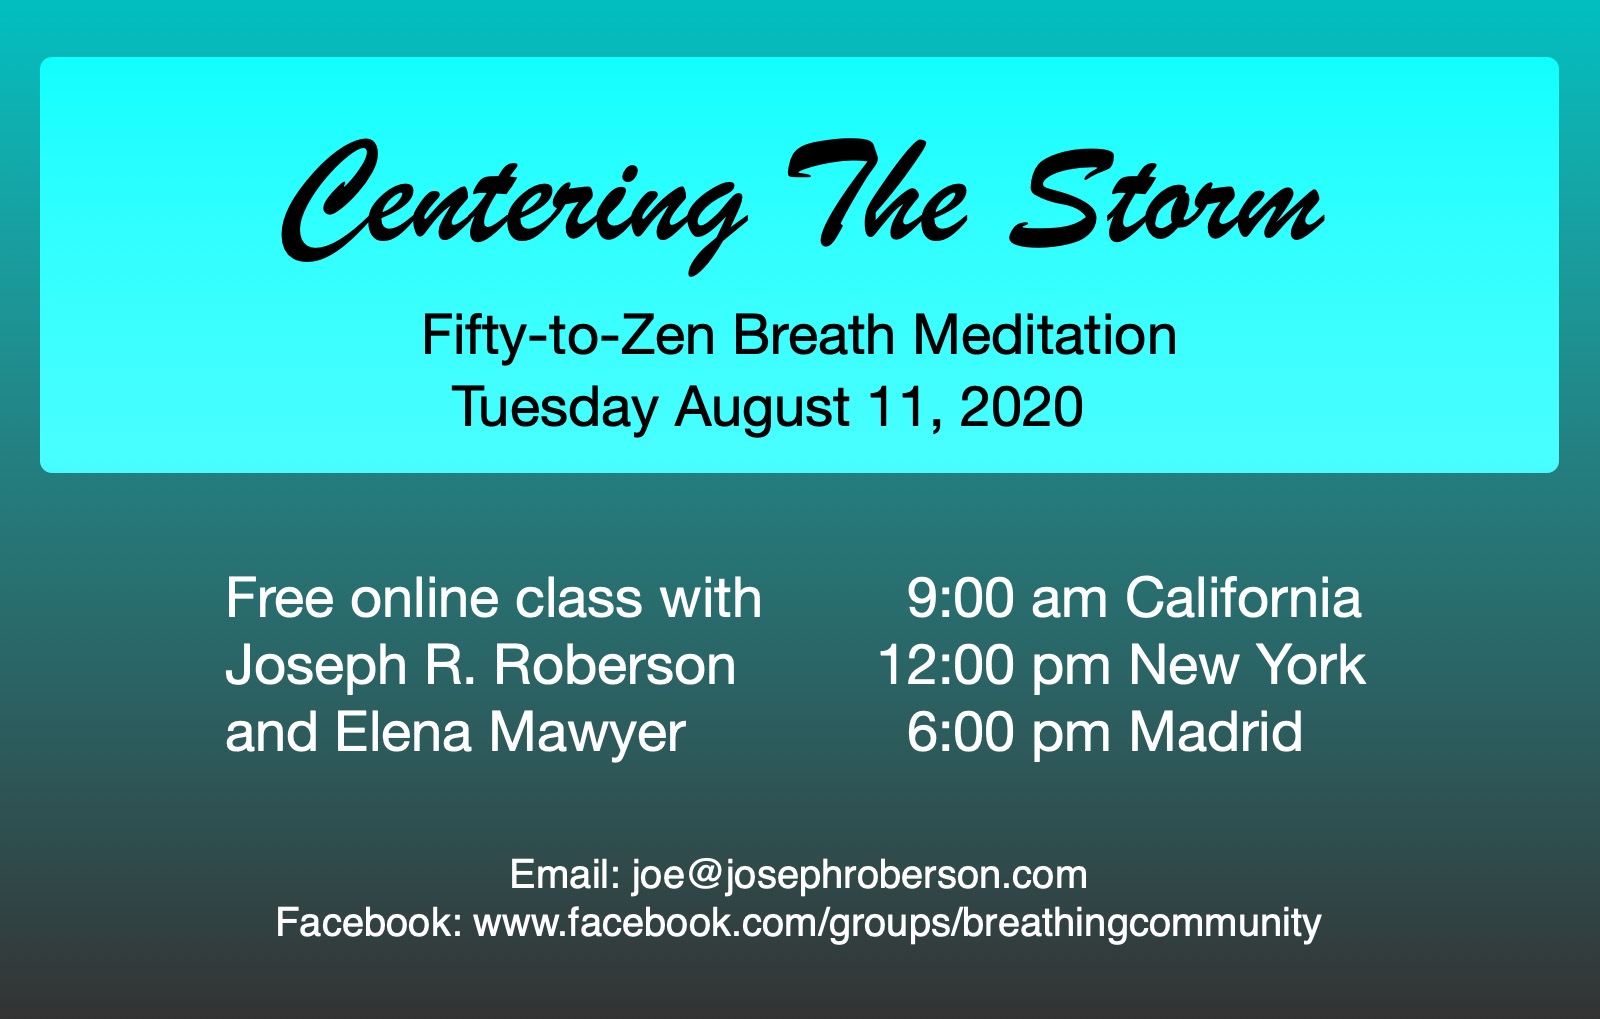 Centering The Storm free class ad